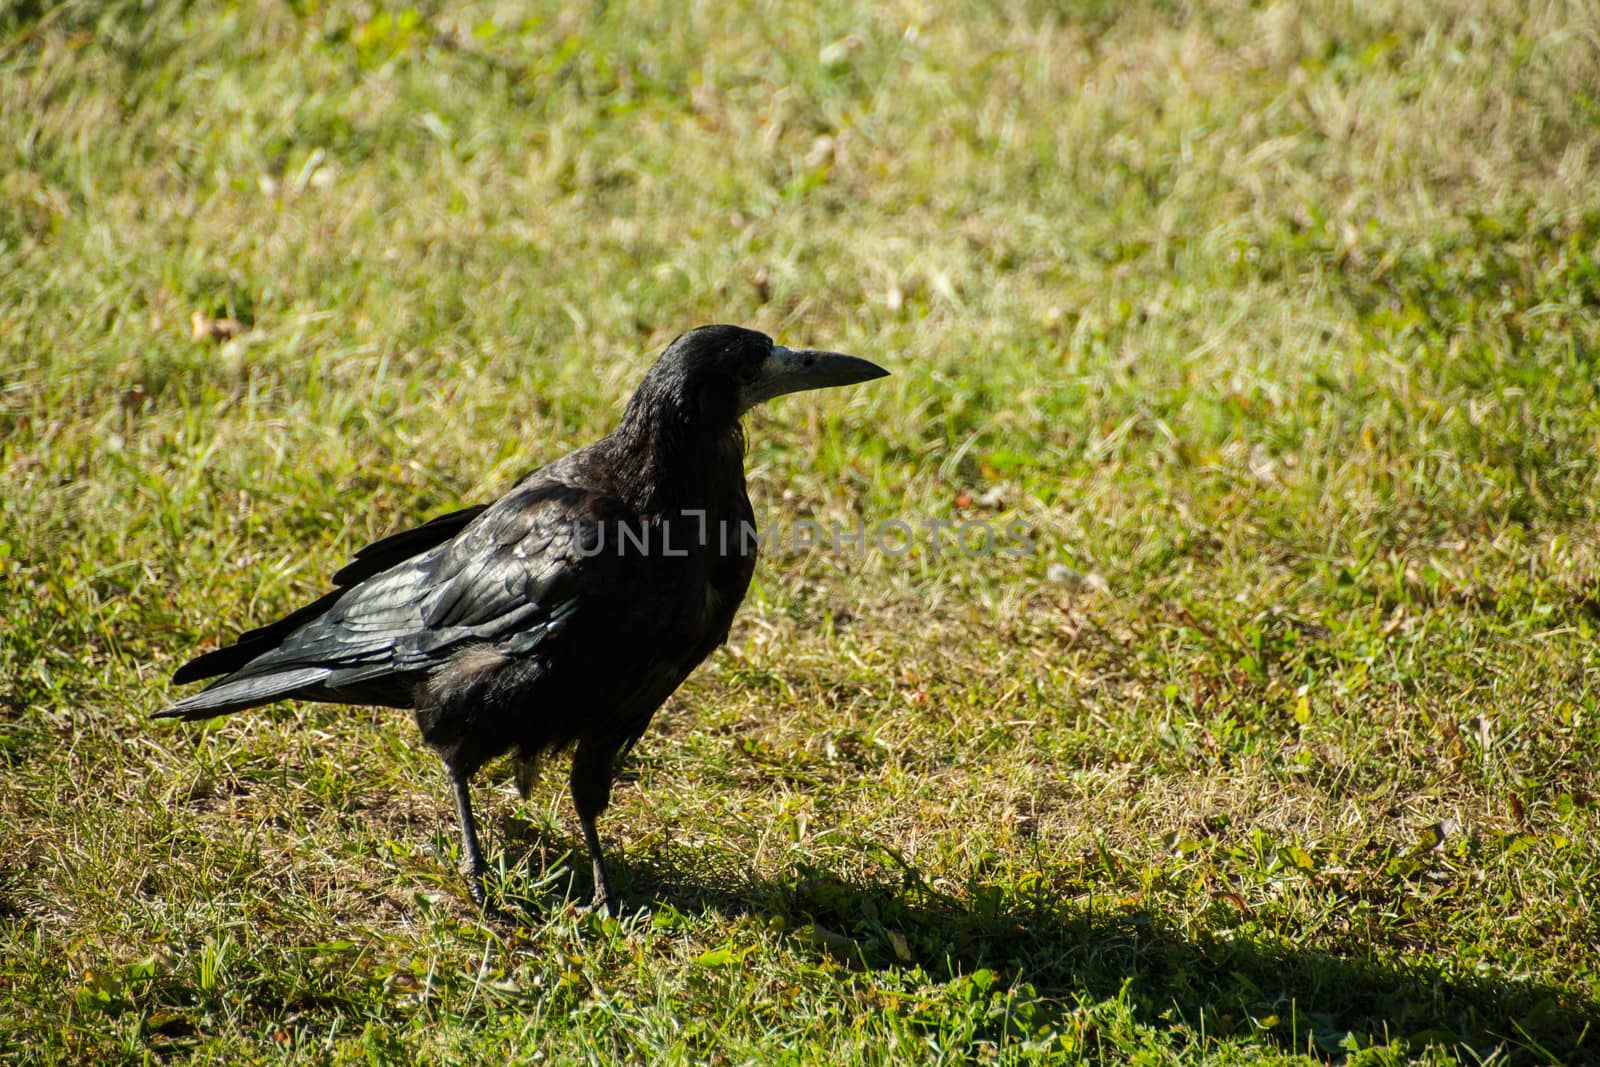  large adult Rook struts across the garden lawn before feeding on carrion by alexx60